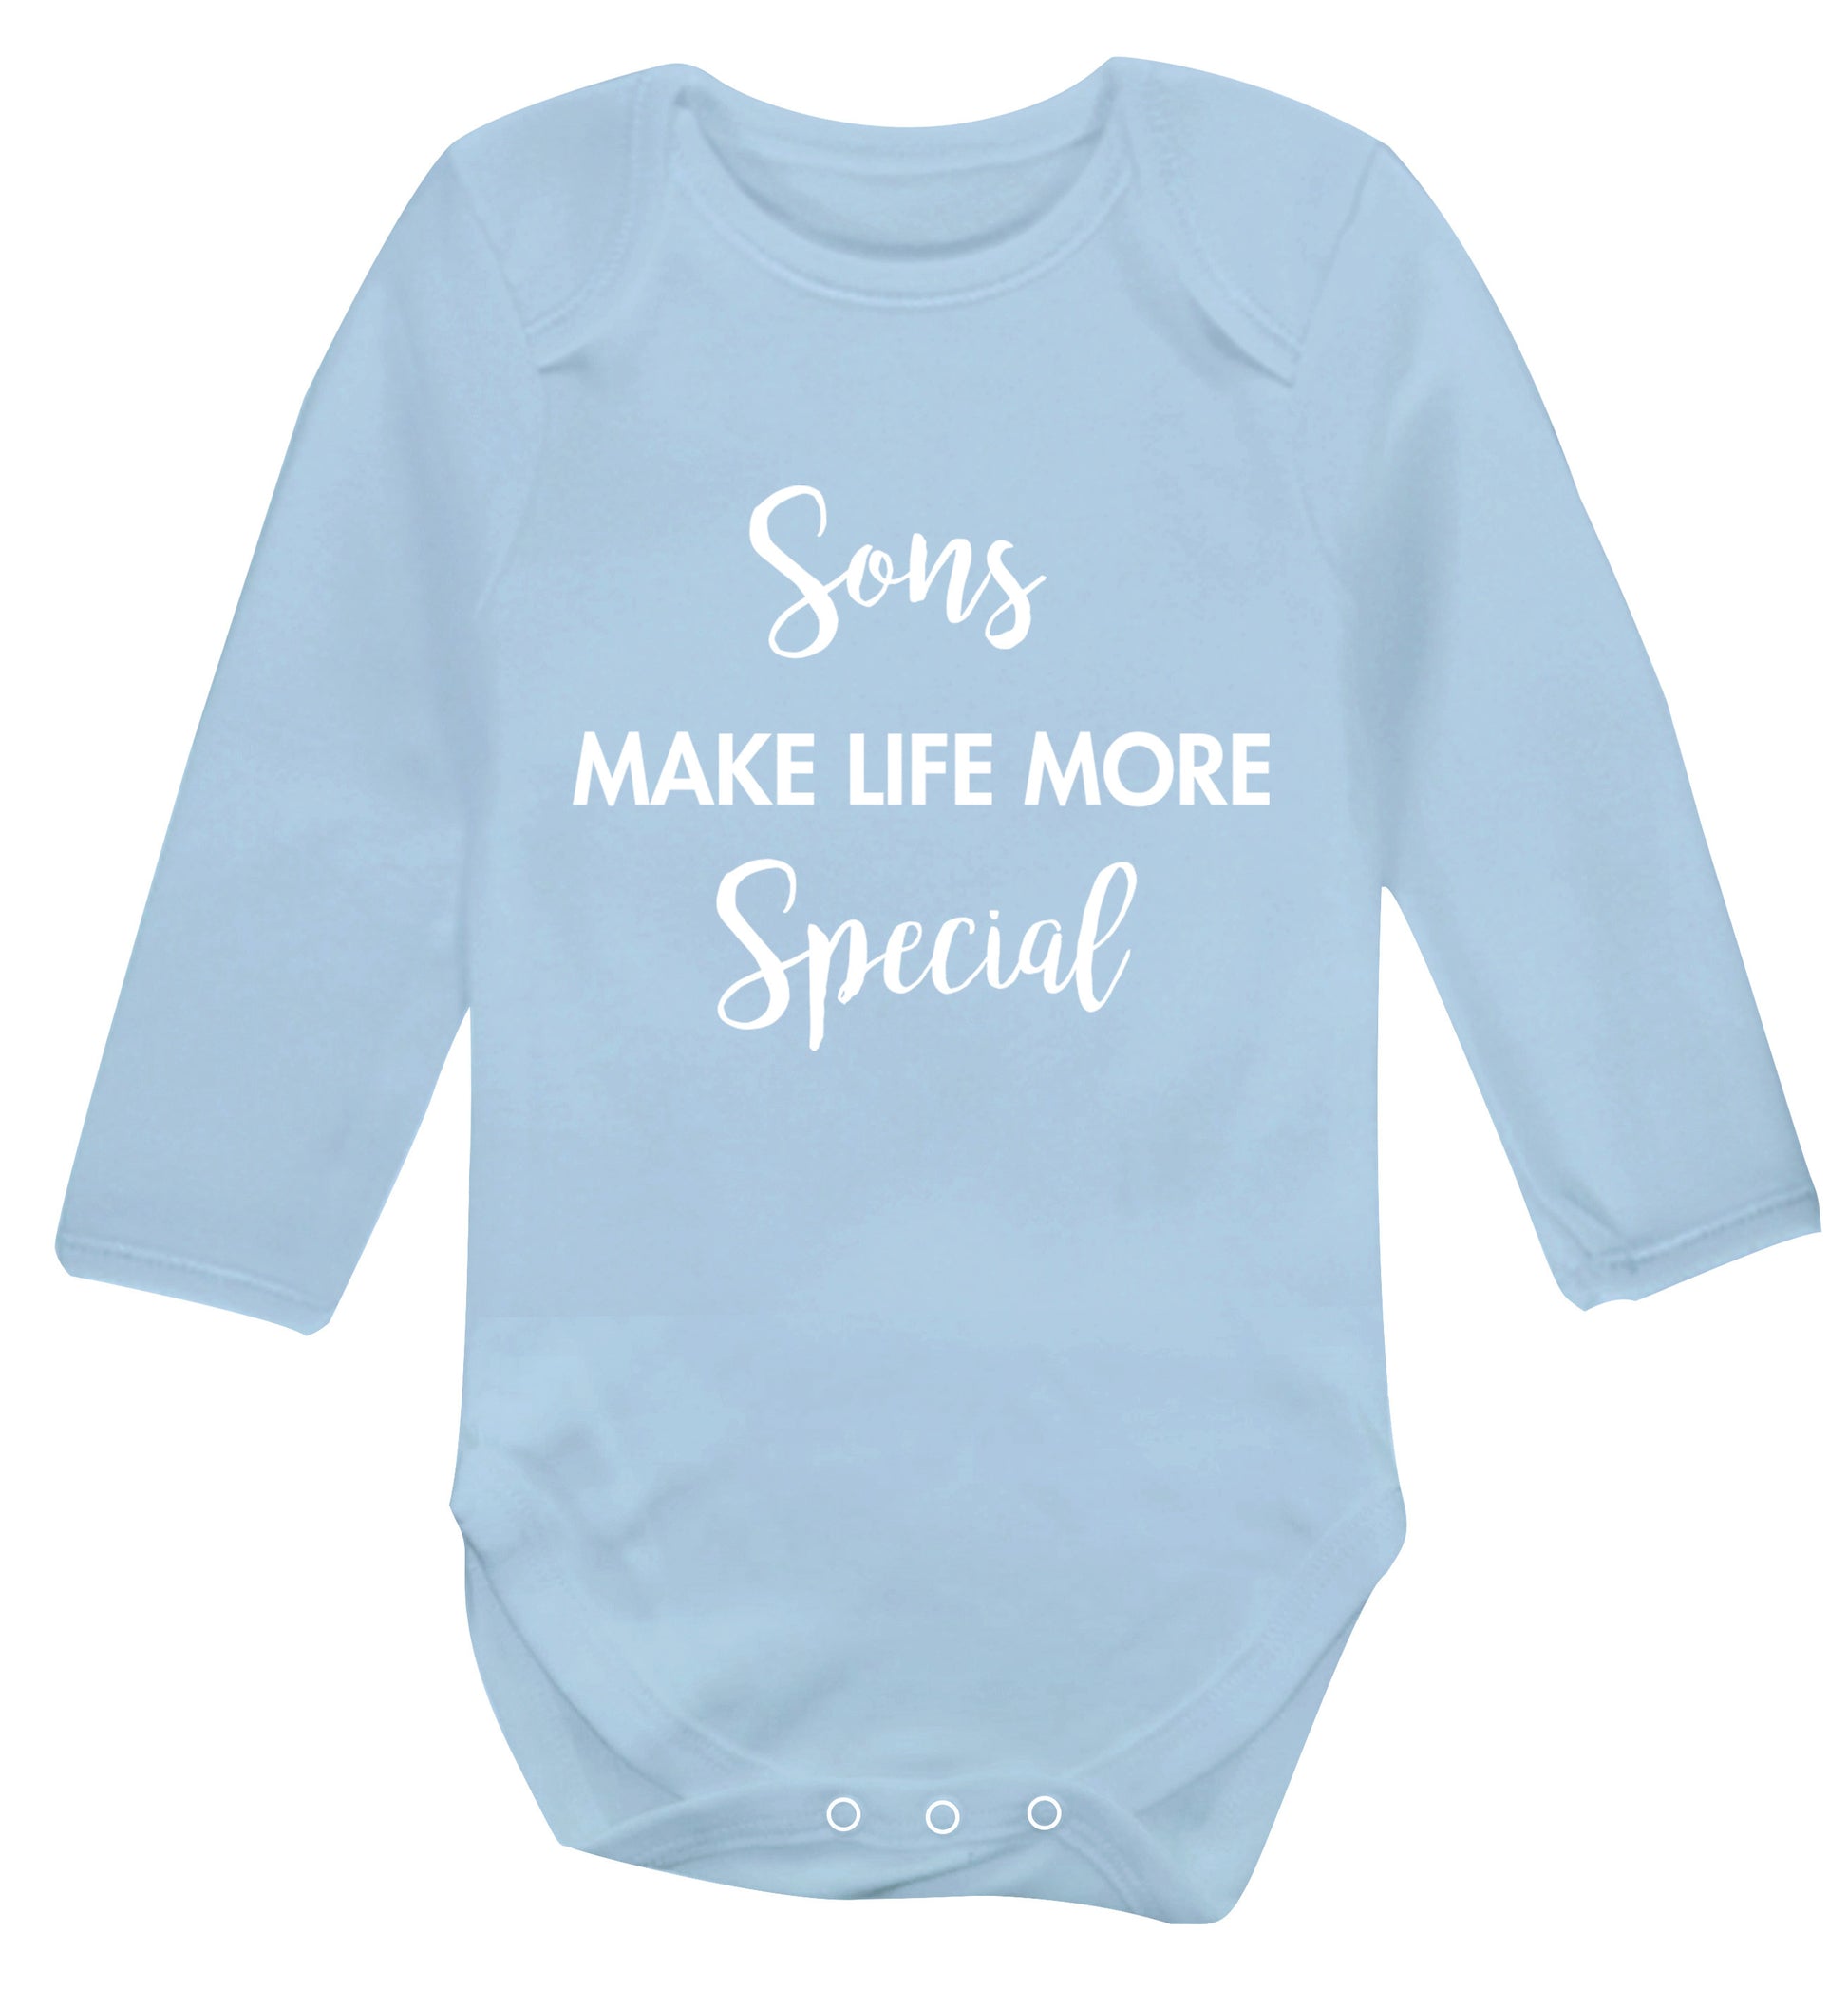 Daughters make life more special Baby Vest long sleeved pale blue 6-12 months